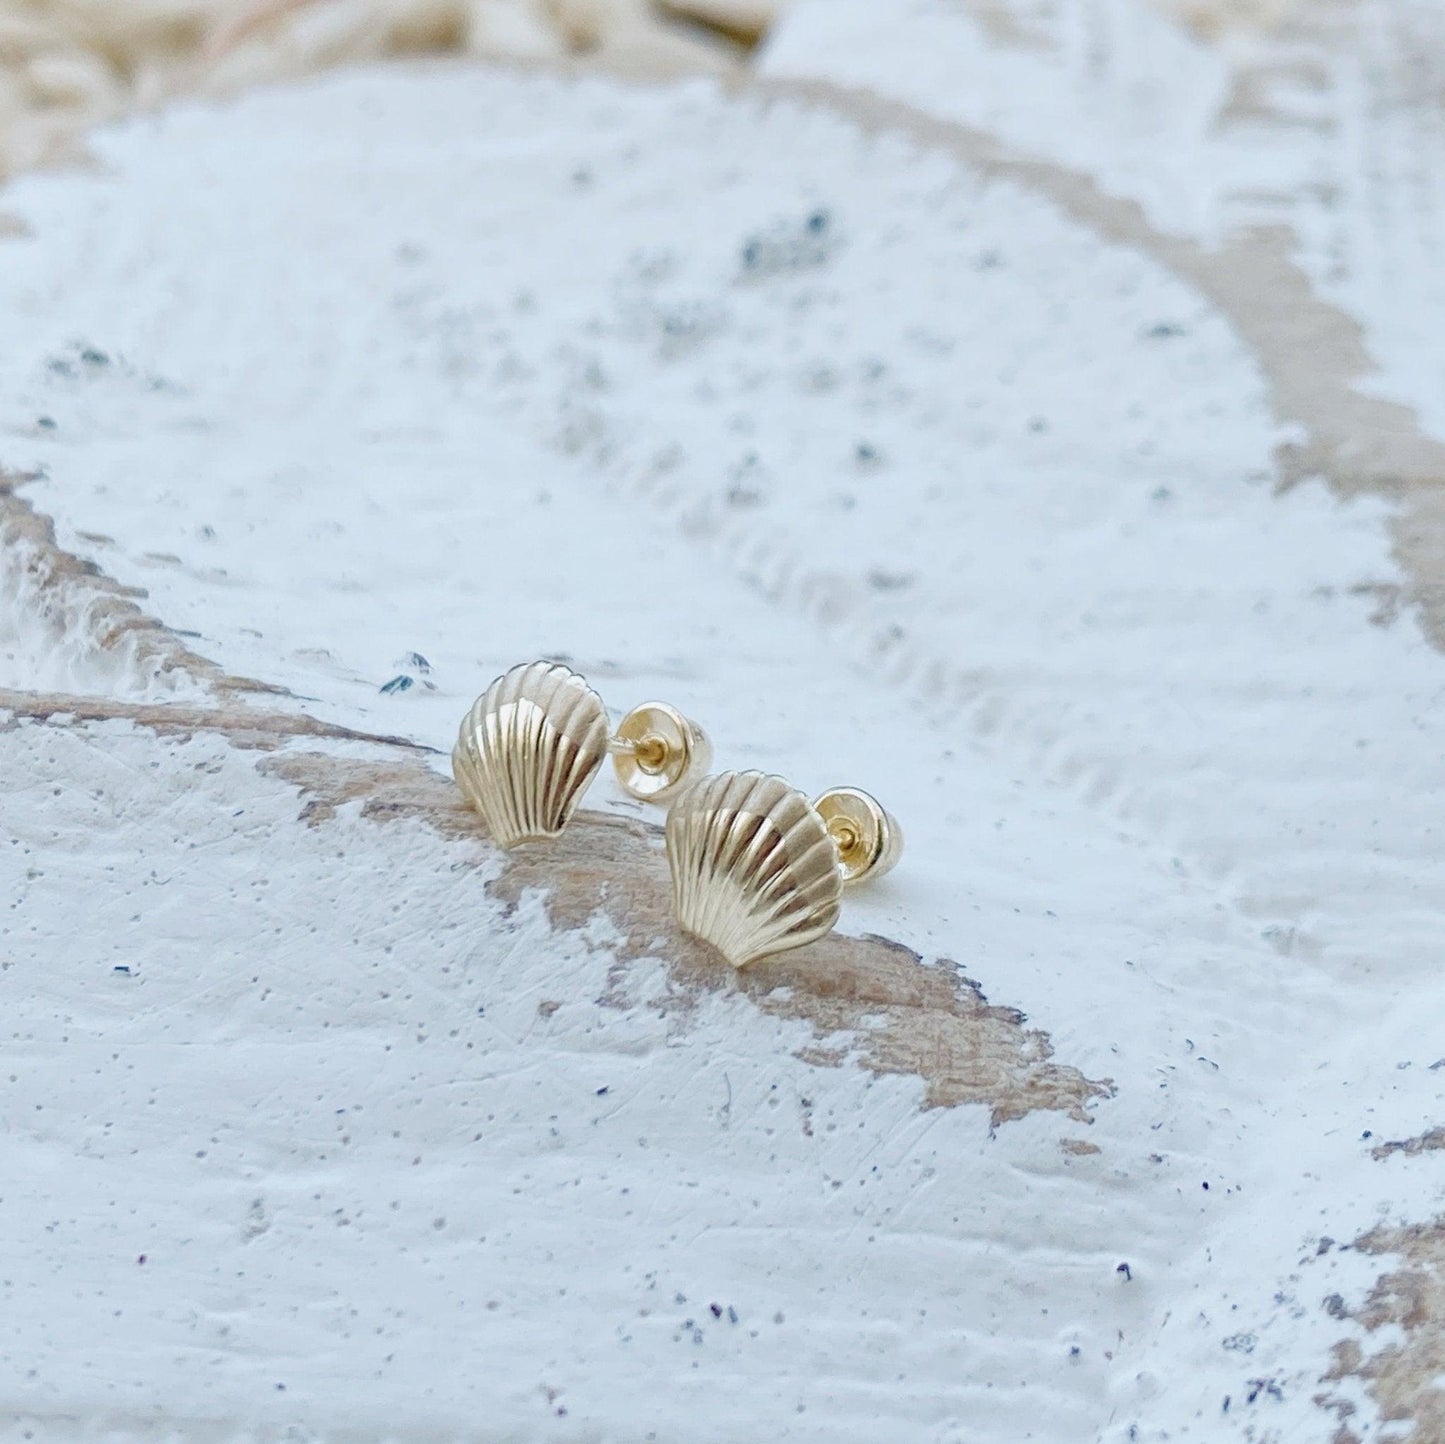 These seashell stud earrings are 10K gold plated and made with real sea shells. They are the perfect pair of everyday earrings, but also lovely enough to wear on your wedding day or at a formal event. Choose from a variety of colors and sizes. This is also a great gift for family and friends!